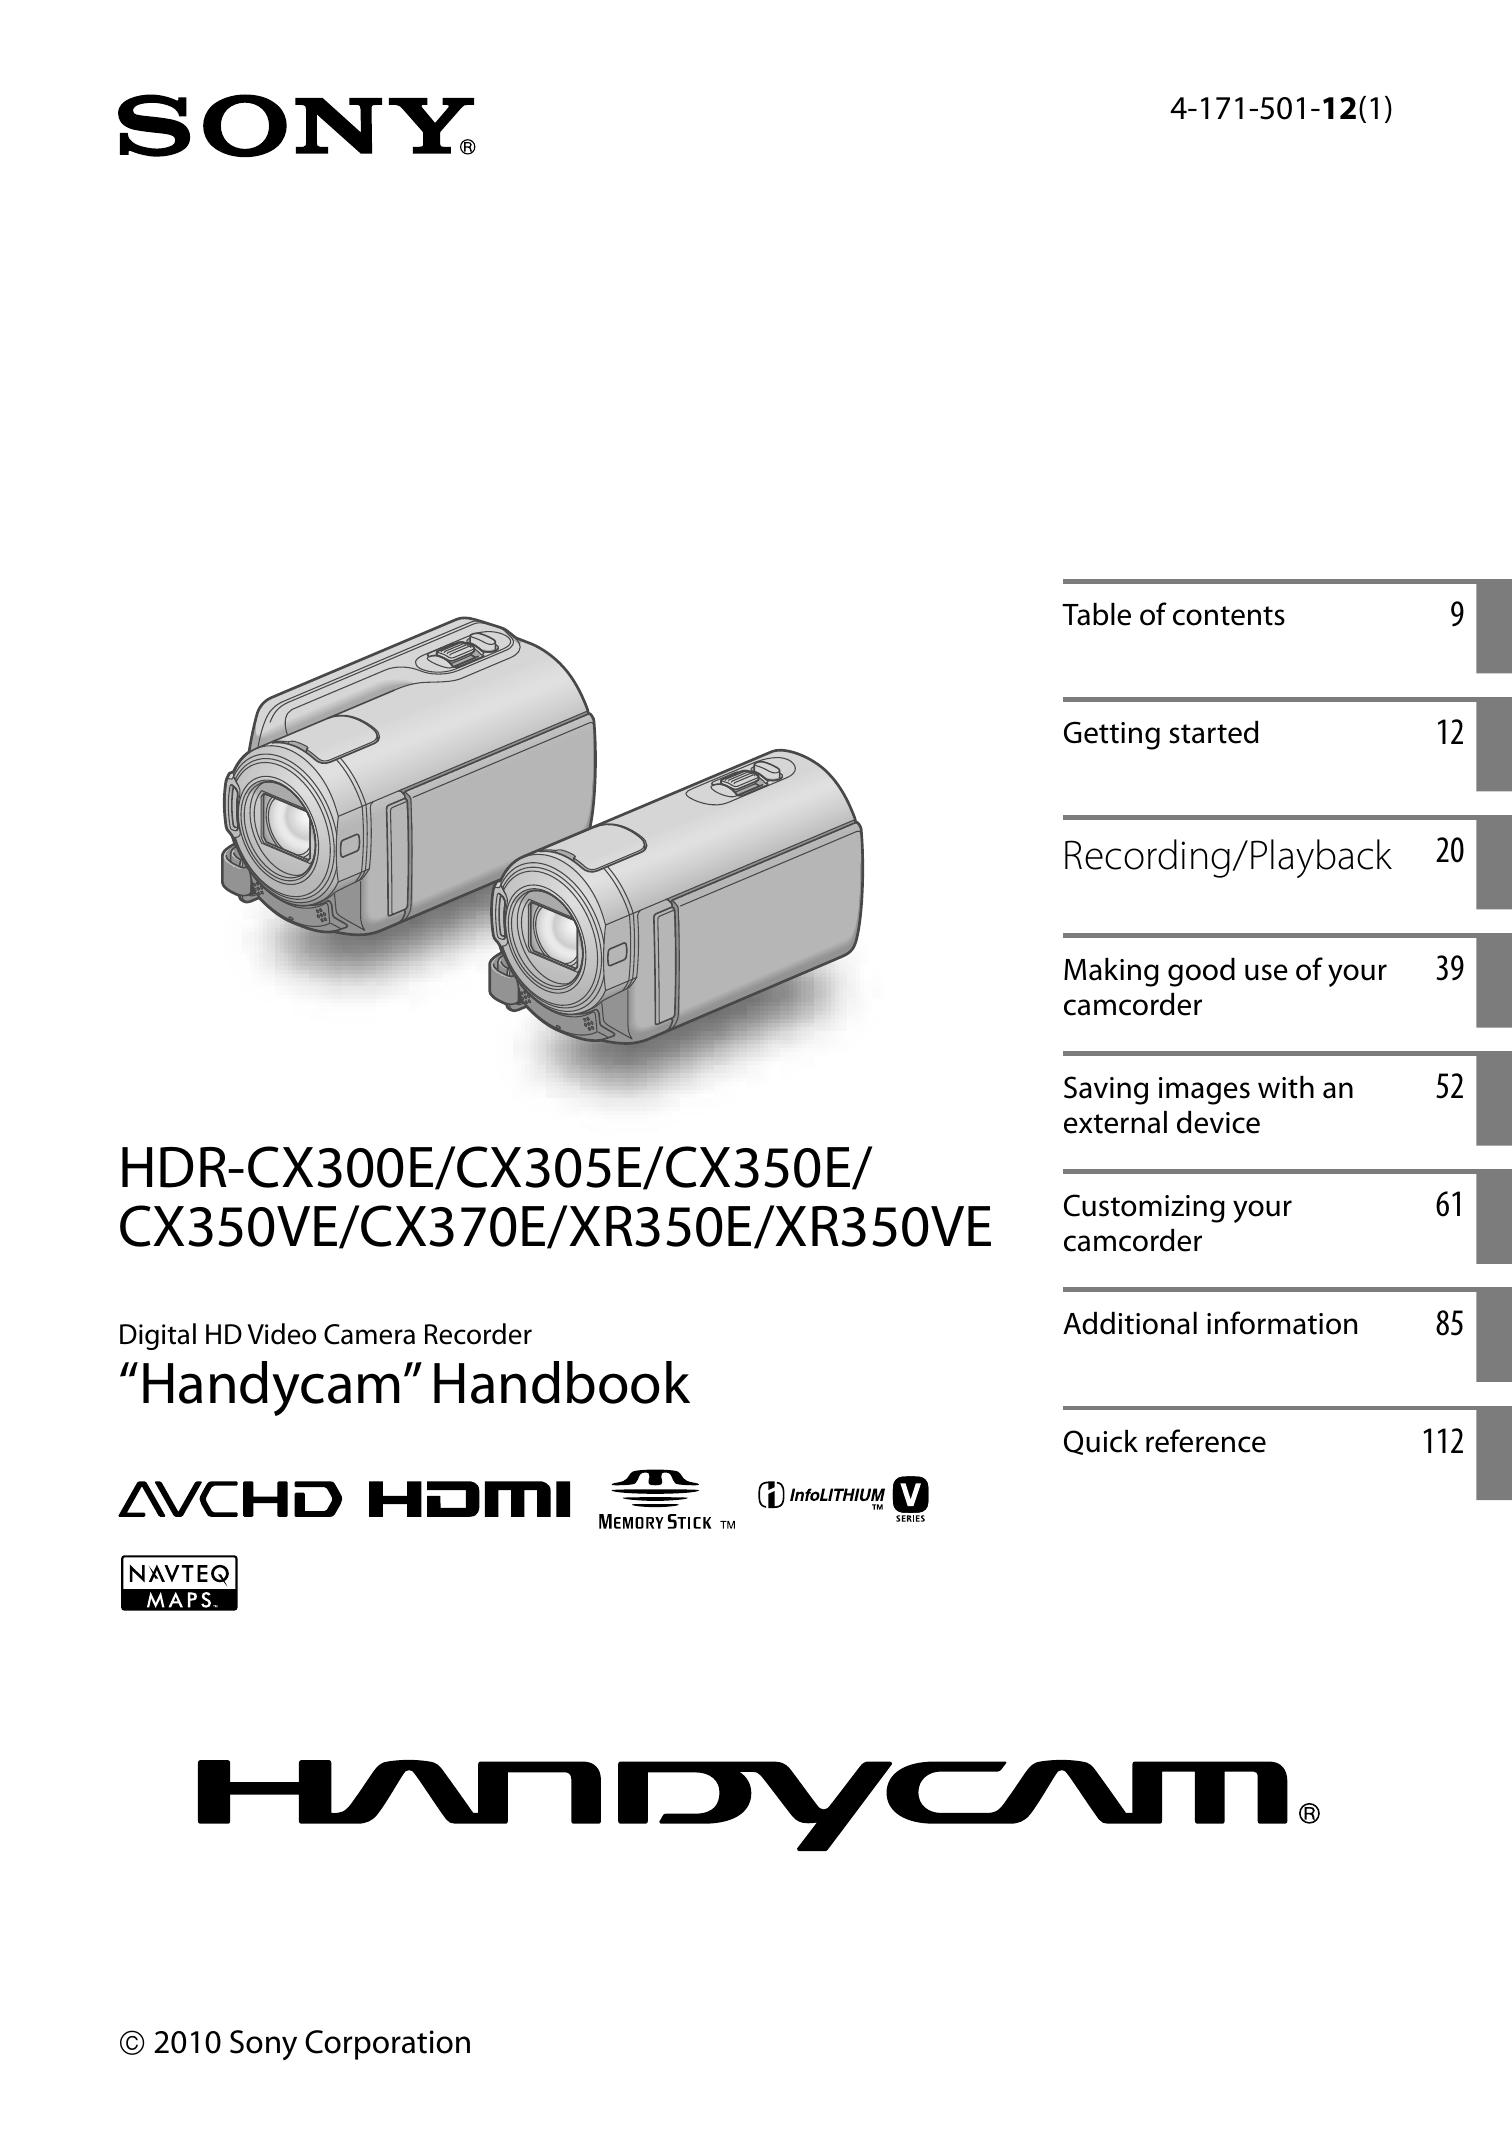 Sony 4-171-501-12(1) Camcorder User Manual